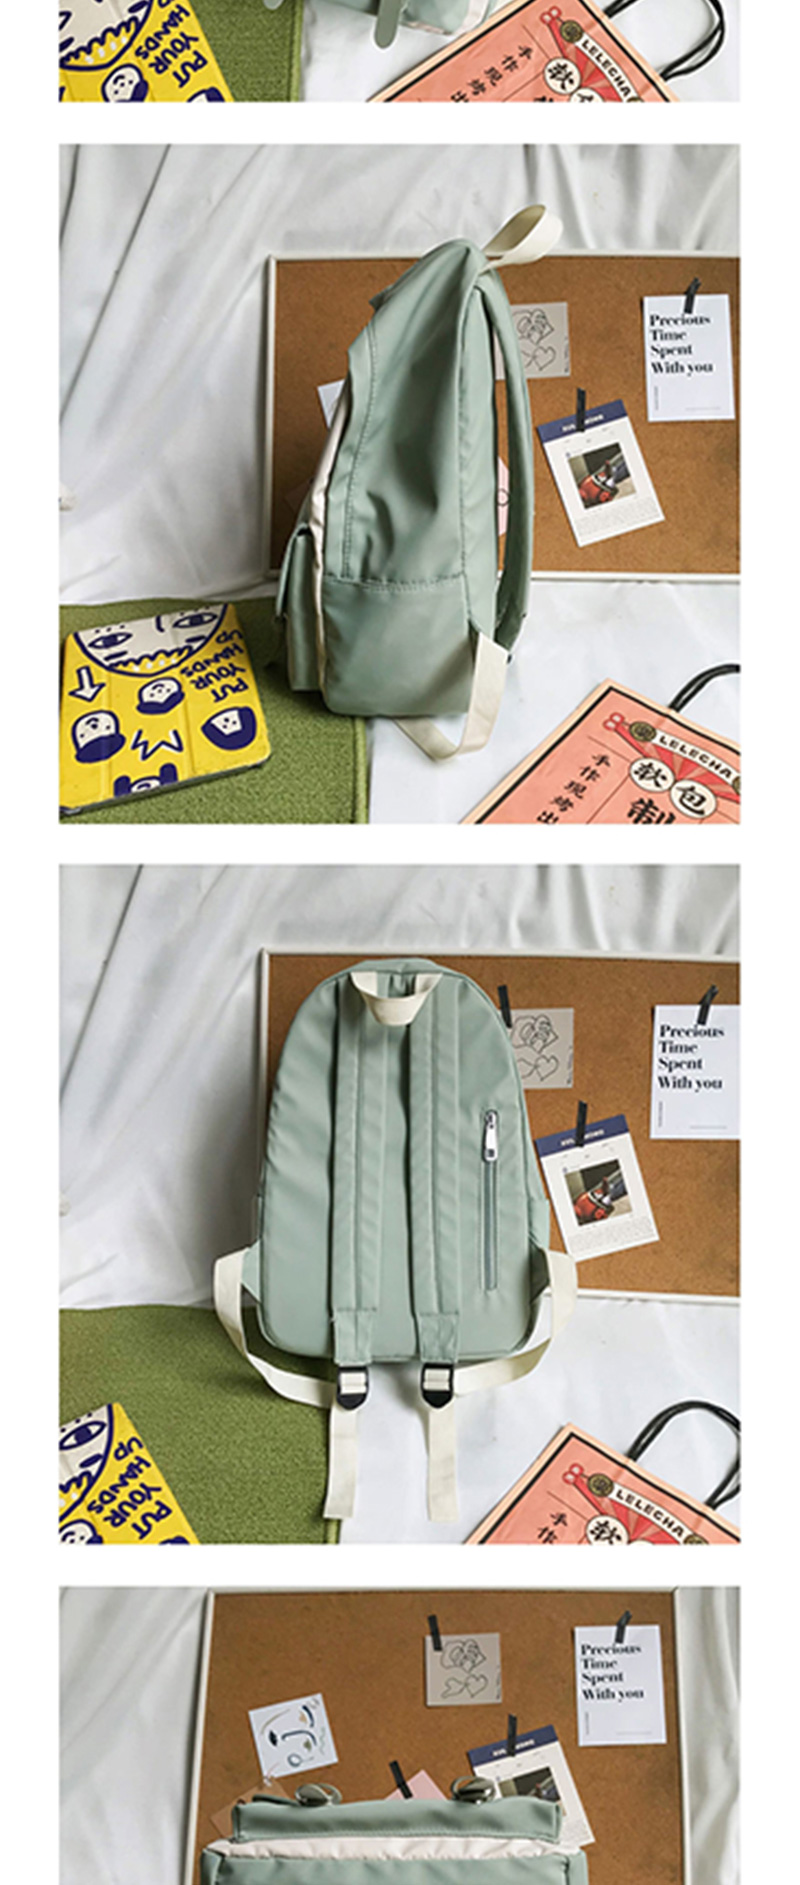 Fashion Yellow Contrast Stitching Labeling Backpack,Backpack